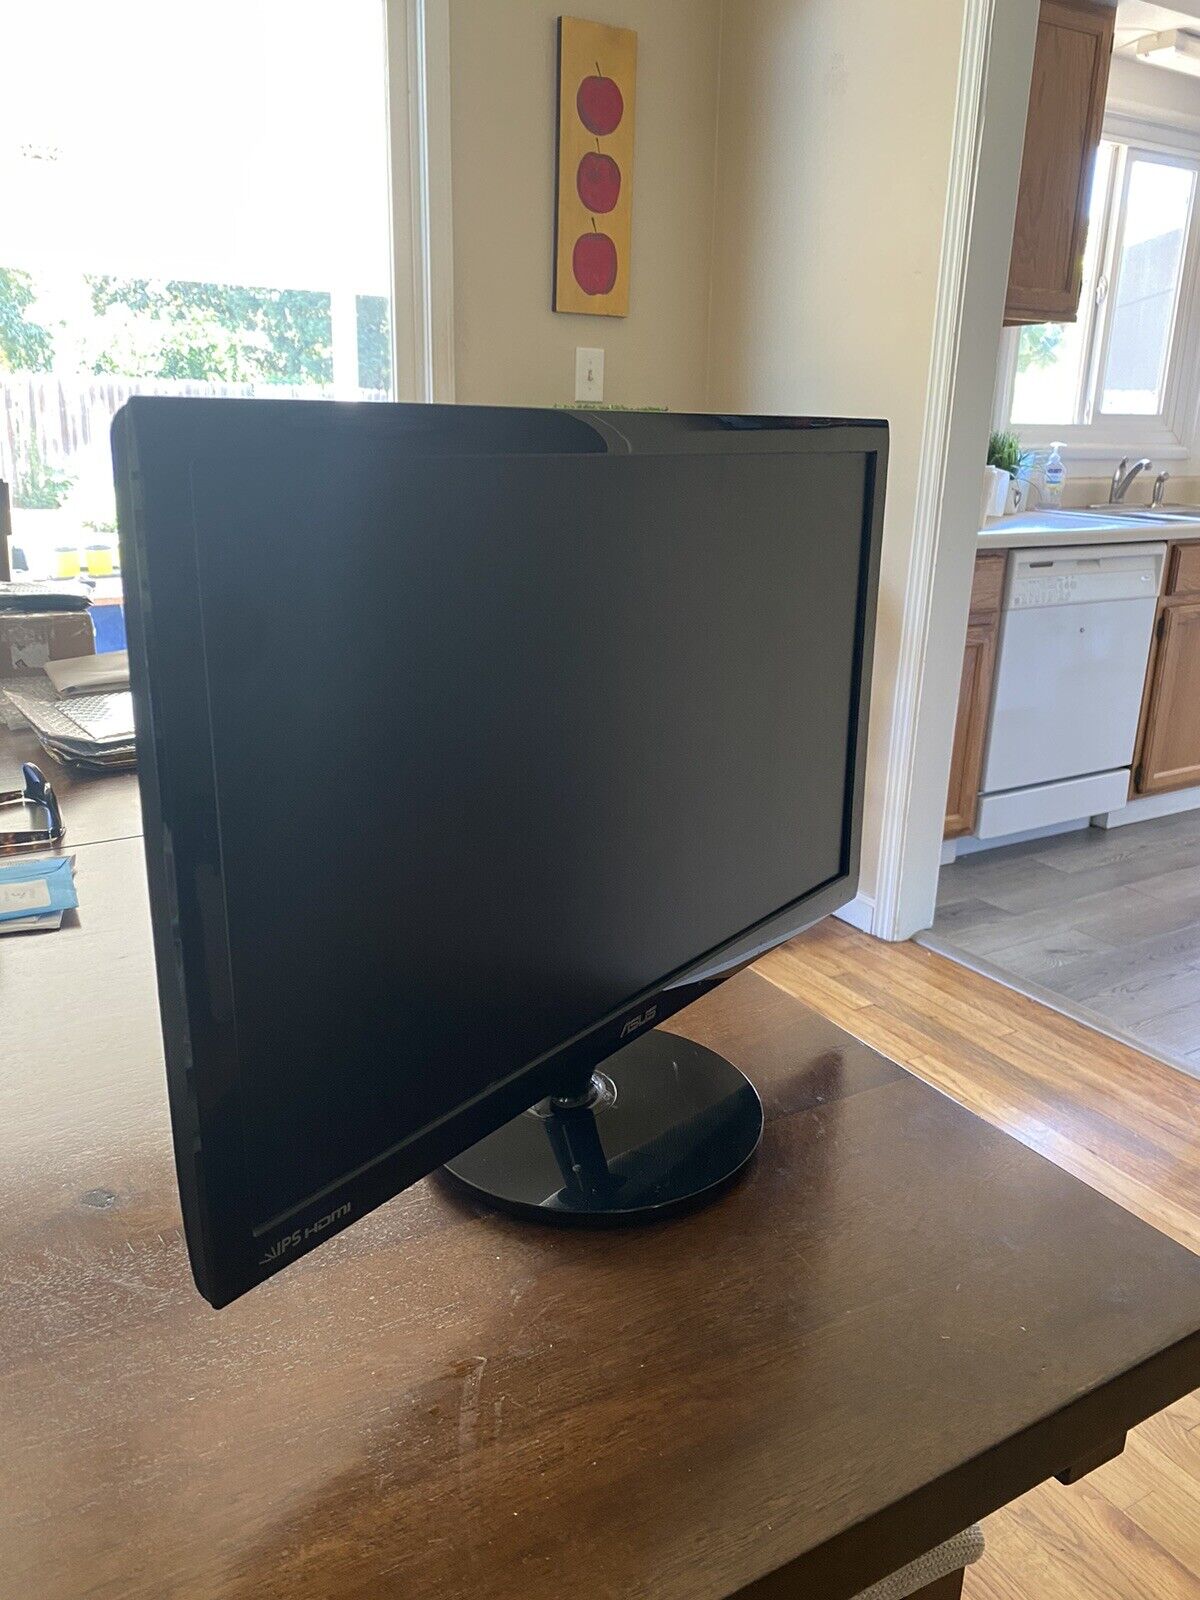 ASUS 23.8 inch Monitor, Great a￼s A Secondary Monitor. In great condition.